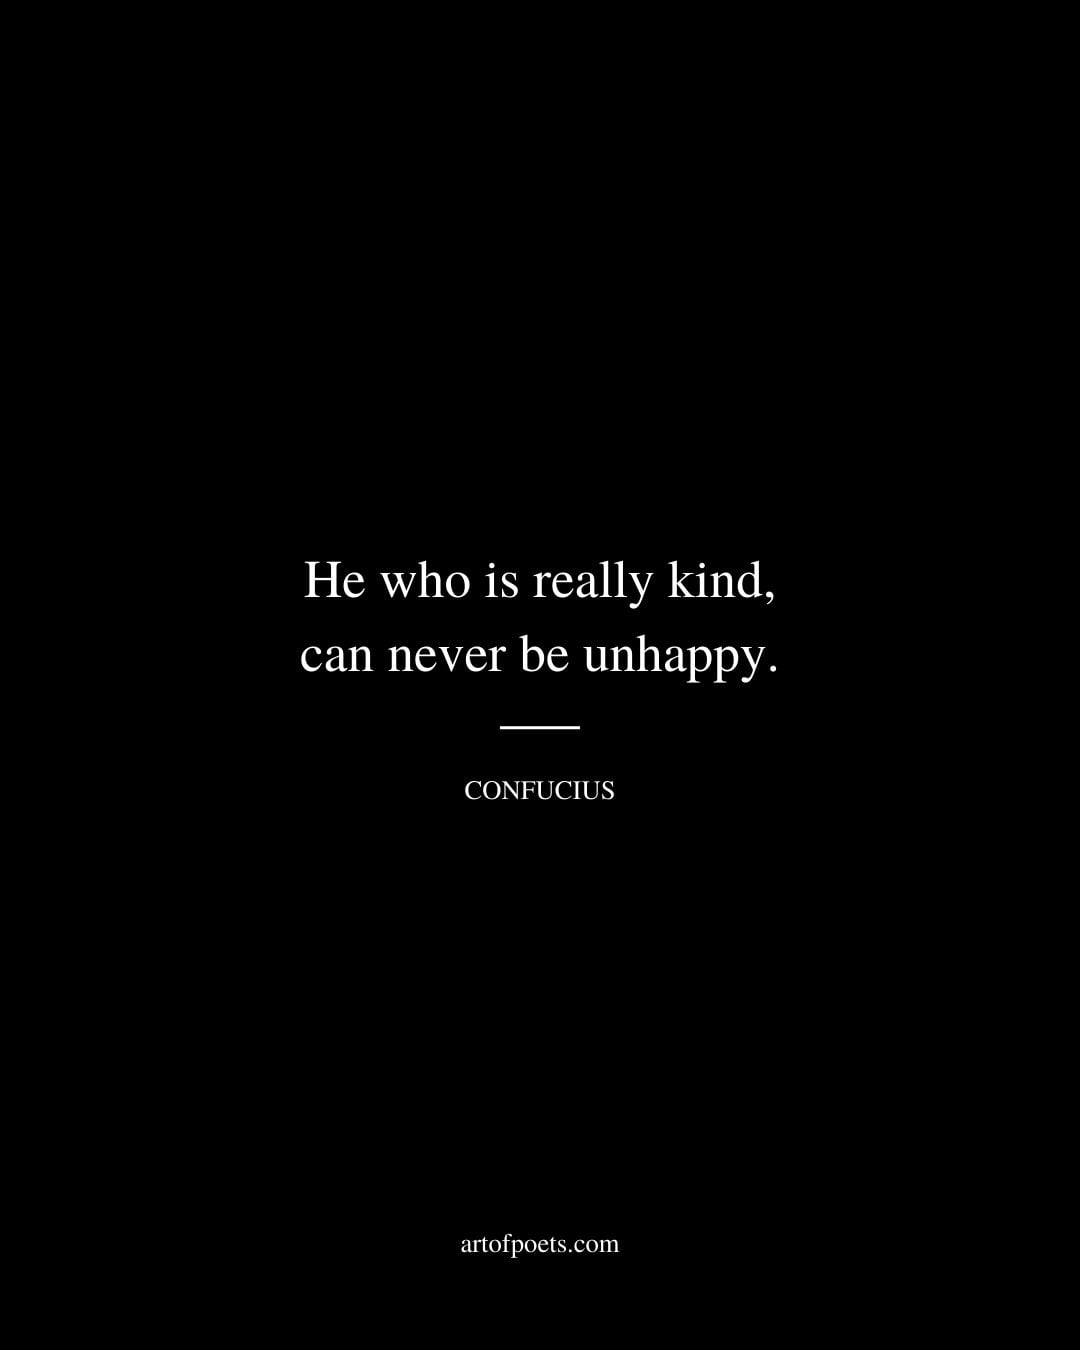 He who is really kind can never be unhappy 1